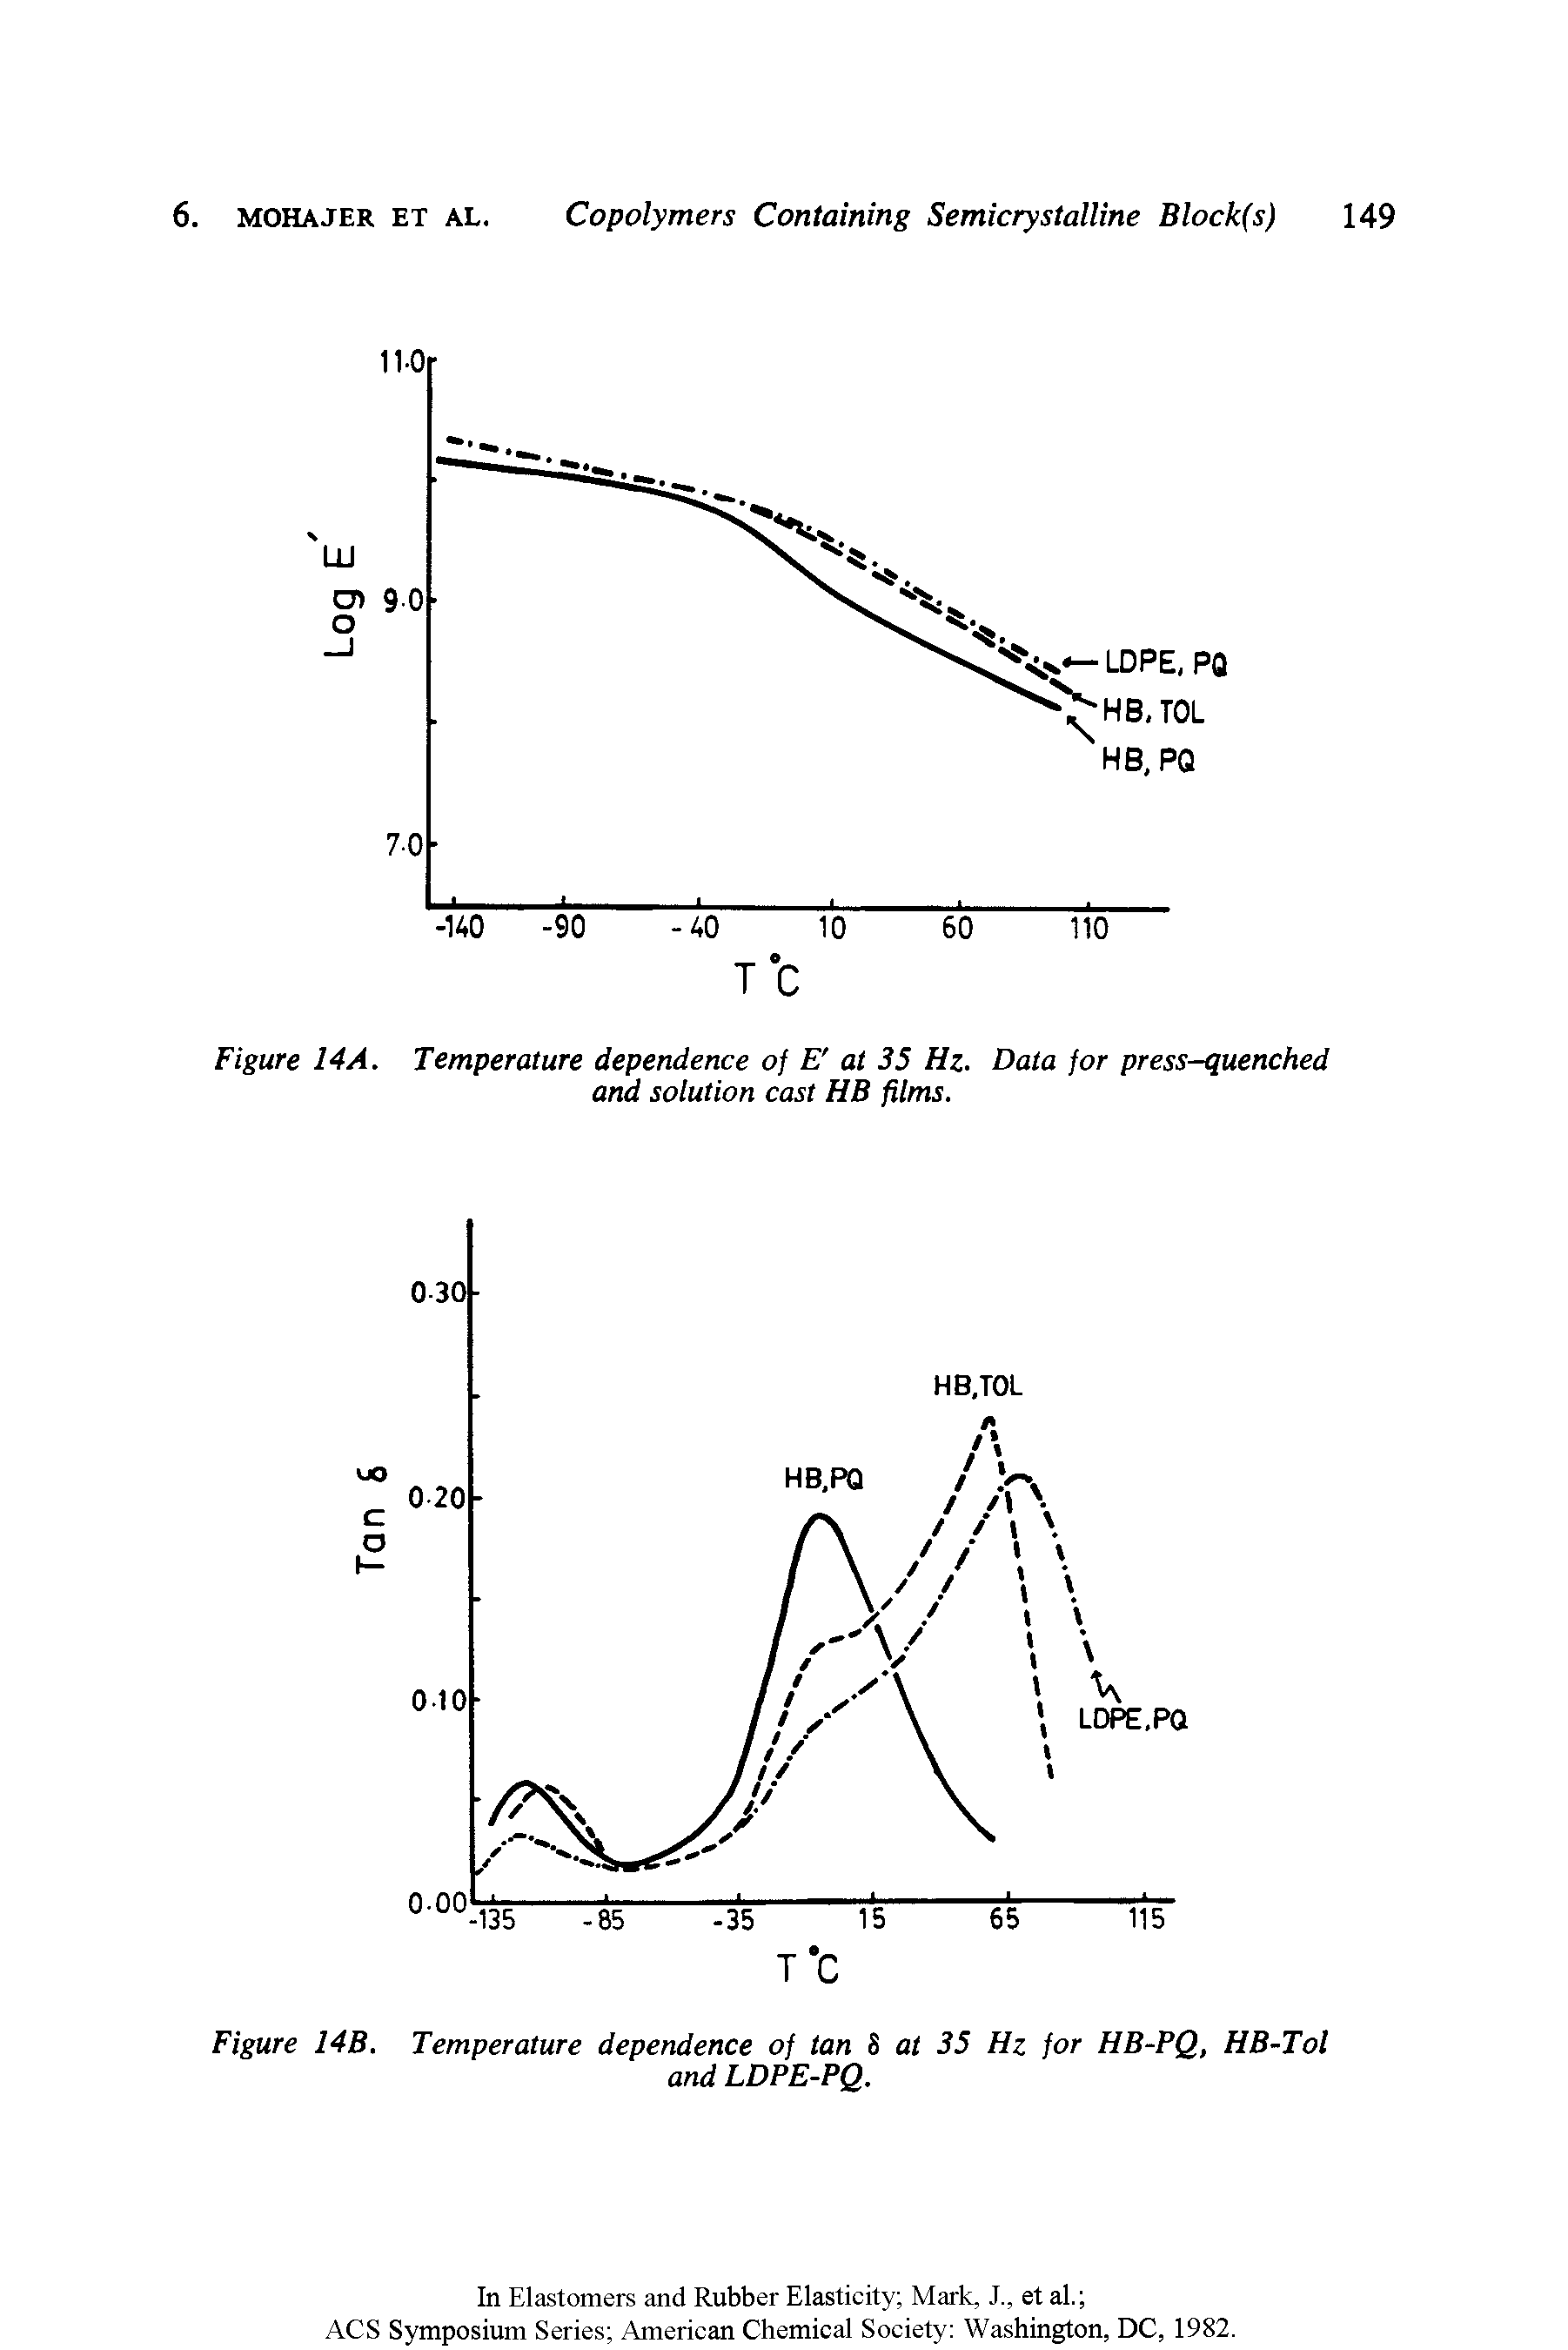 Figure 14A. Temperature dependence of E at 35 Hz. Data for press-quenched and solution cast HB films.